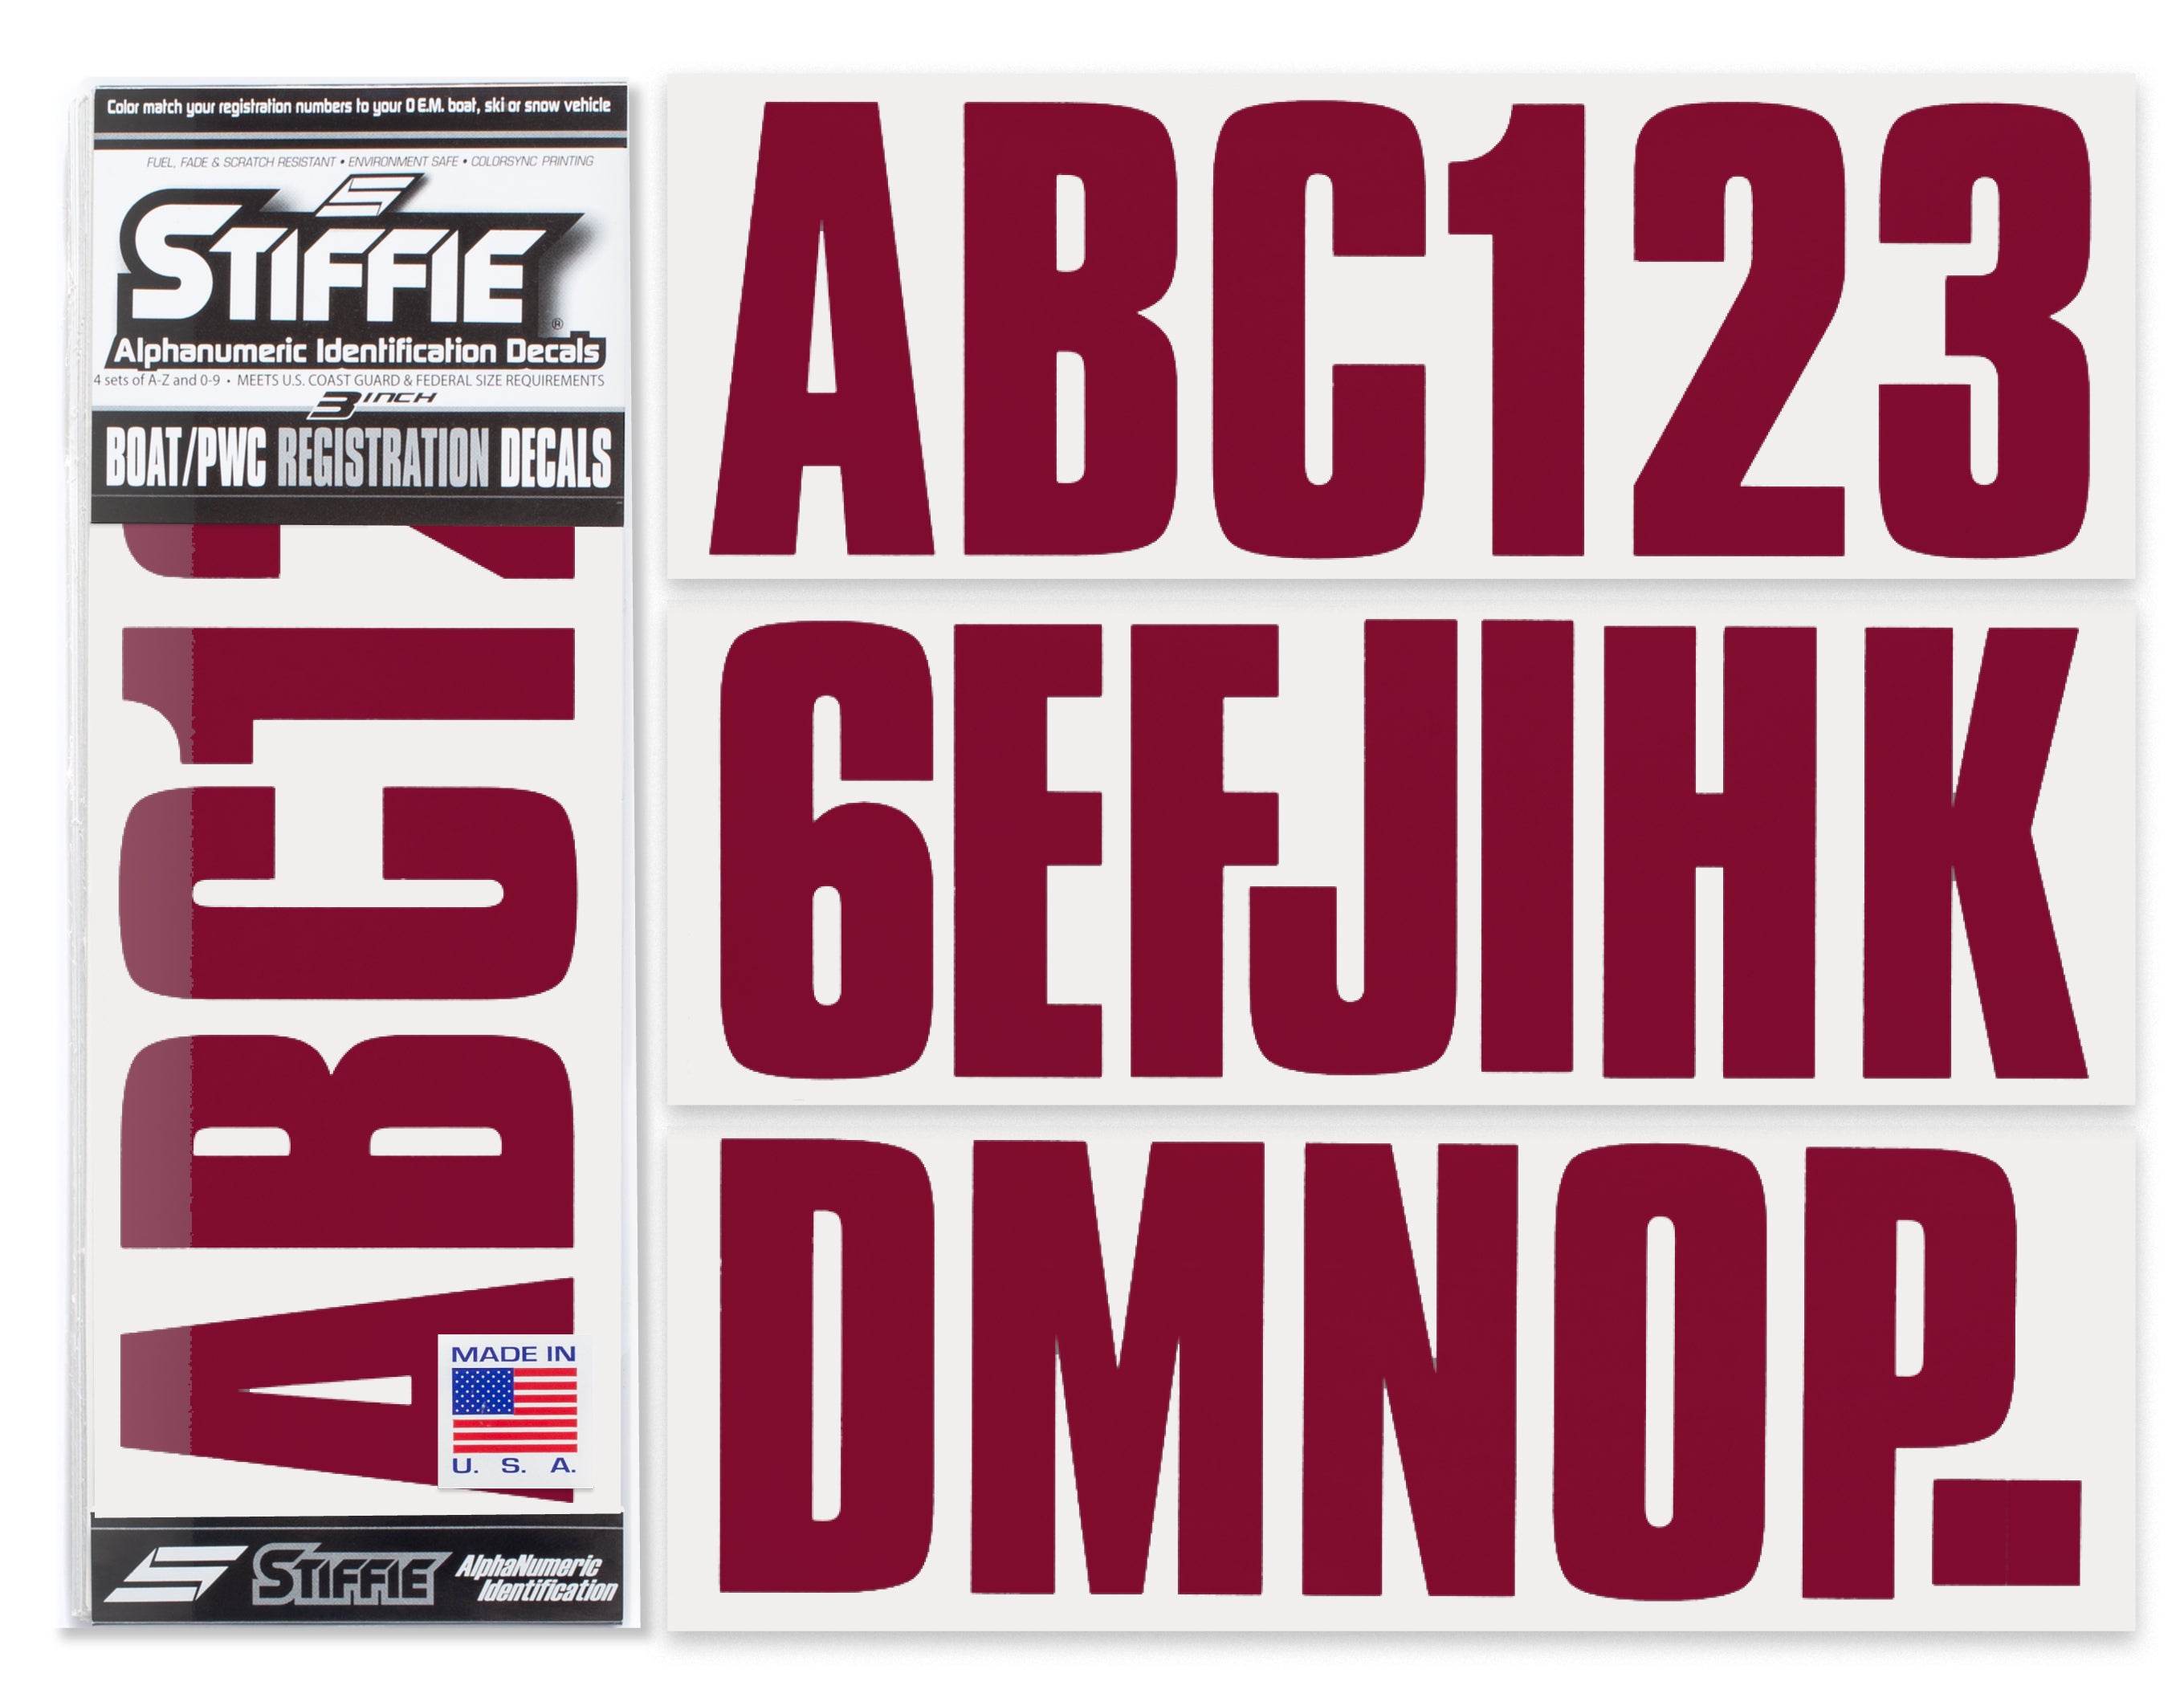 STIFFIE Uniline Deep Burgundy 3" ID Kit Alpha-Numeric Registration Identification Numbers Stickers Decals for Boats & Personal Watercraft